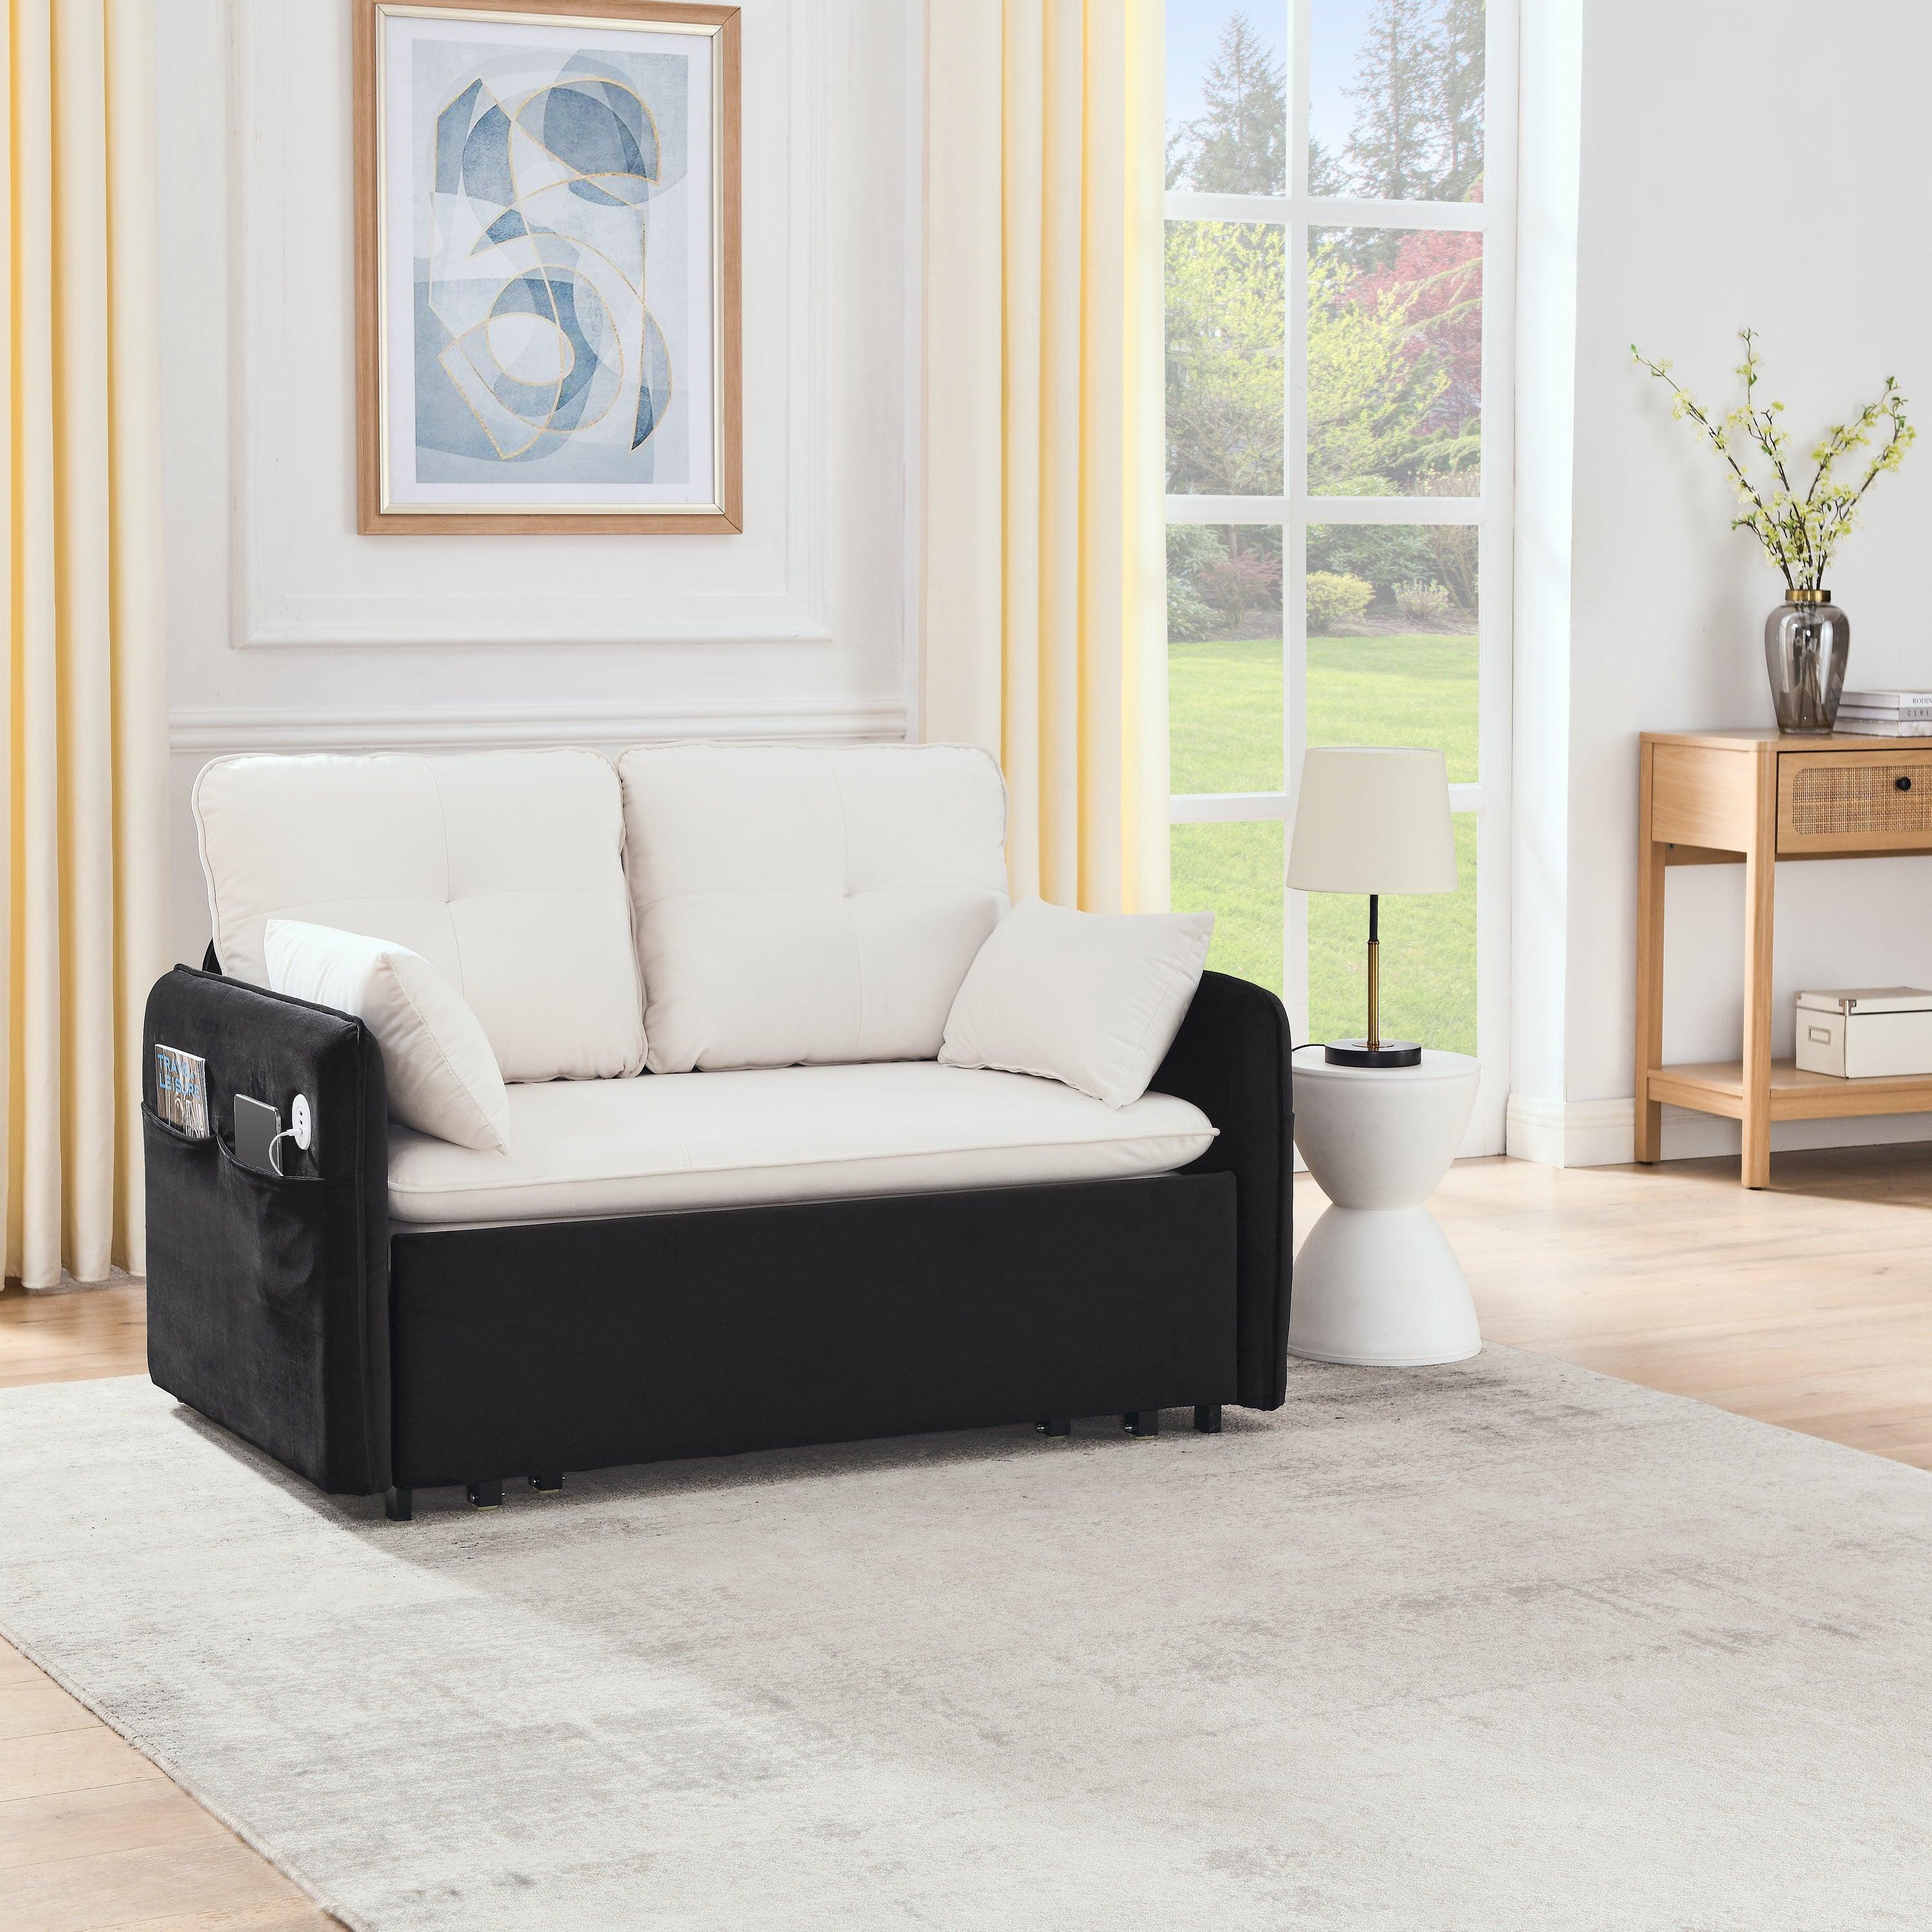 🆓🚛 53" Modern Convertible Sofa Bed W/2 Removable Armrests W/Usb Power Port, Velvet Recliner Adjustable Sofa W/Head Pull-Out Bed, 2 Pillows, for Living Room Apartment Etc., White-Black